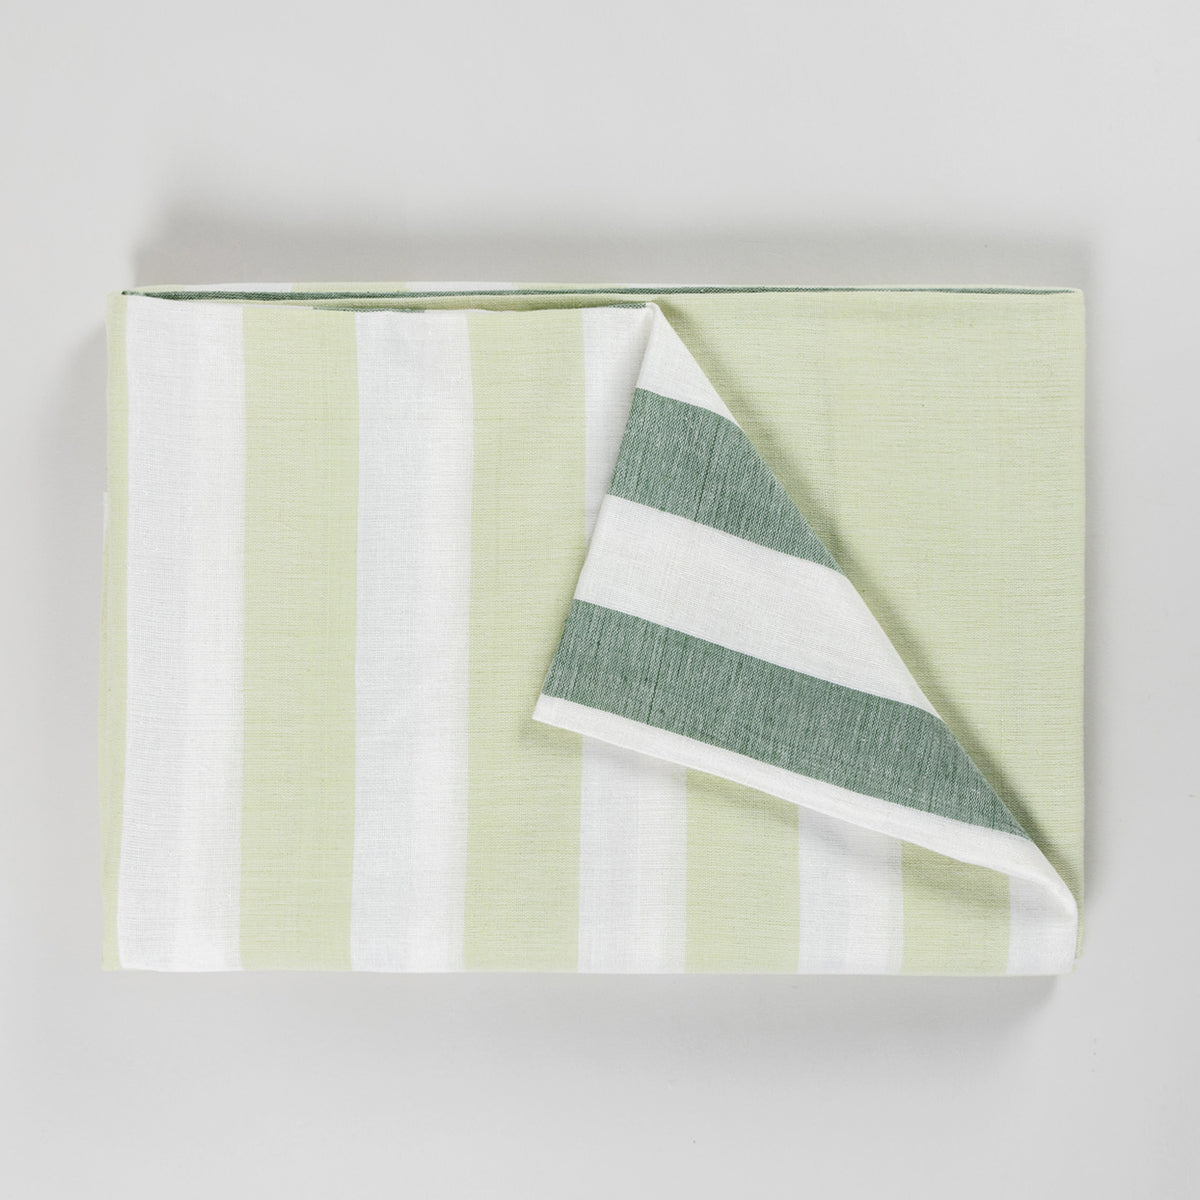 Hand Woven Striped Bed Cover with Pillow Cover in Green & White - 90x108